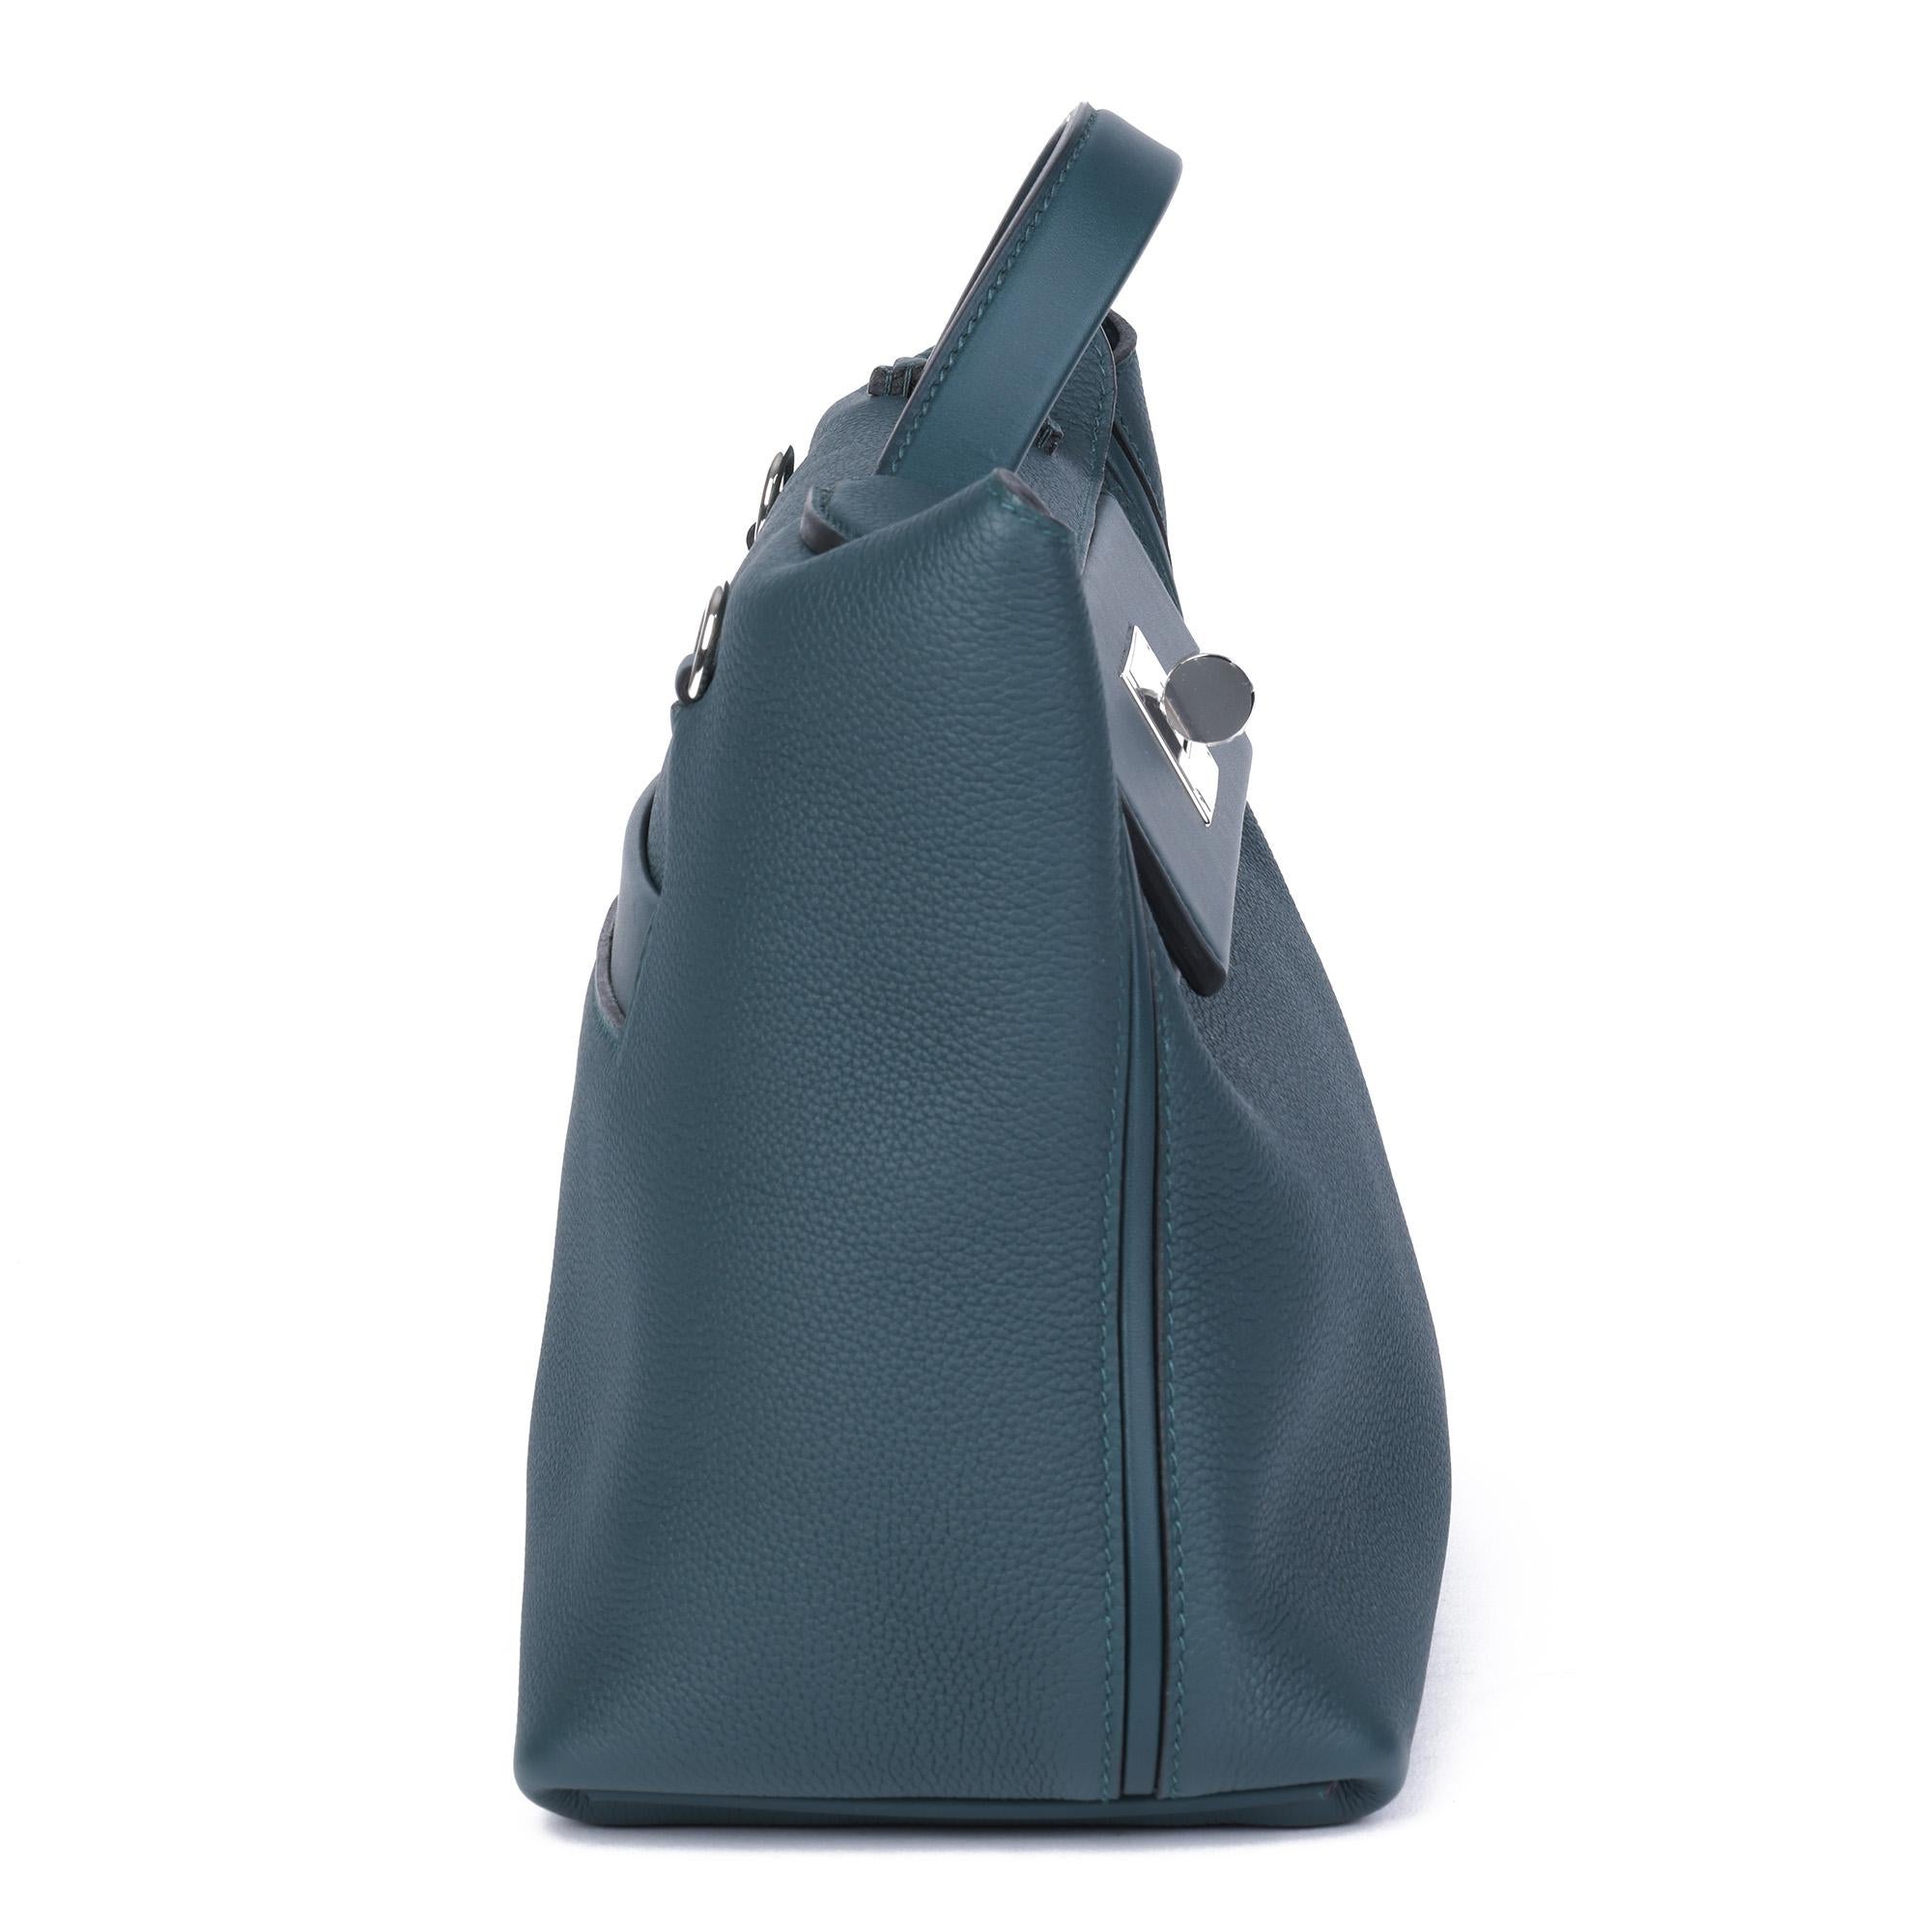 Xupes Reference: HB4215
Serial Number: D
Age (Circa): 2020
Accompanied By: Hermès Dust Bag. Box, Shoulder Strap, Protective Felt, Care Booklet
Authenticity Details: Date Stamp (Made in France)
Gender: Ladies
Type: Top Handle, Shoulder

Colour: Vert